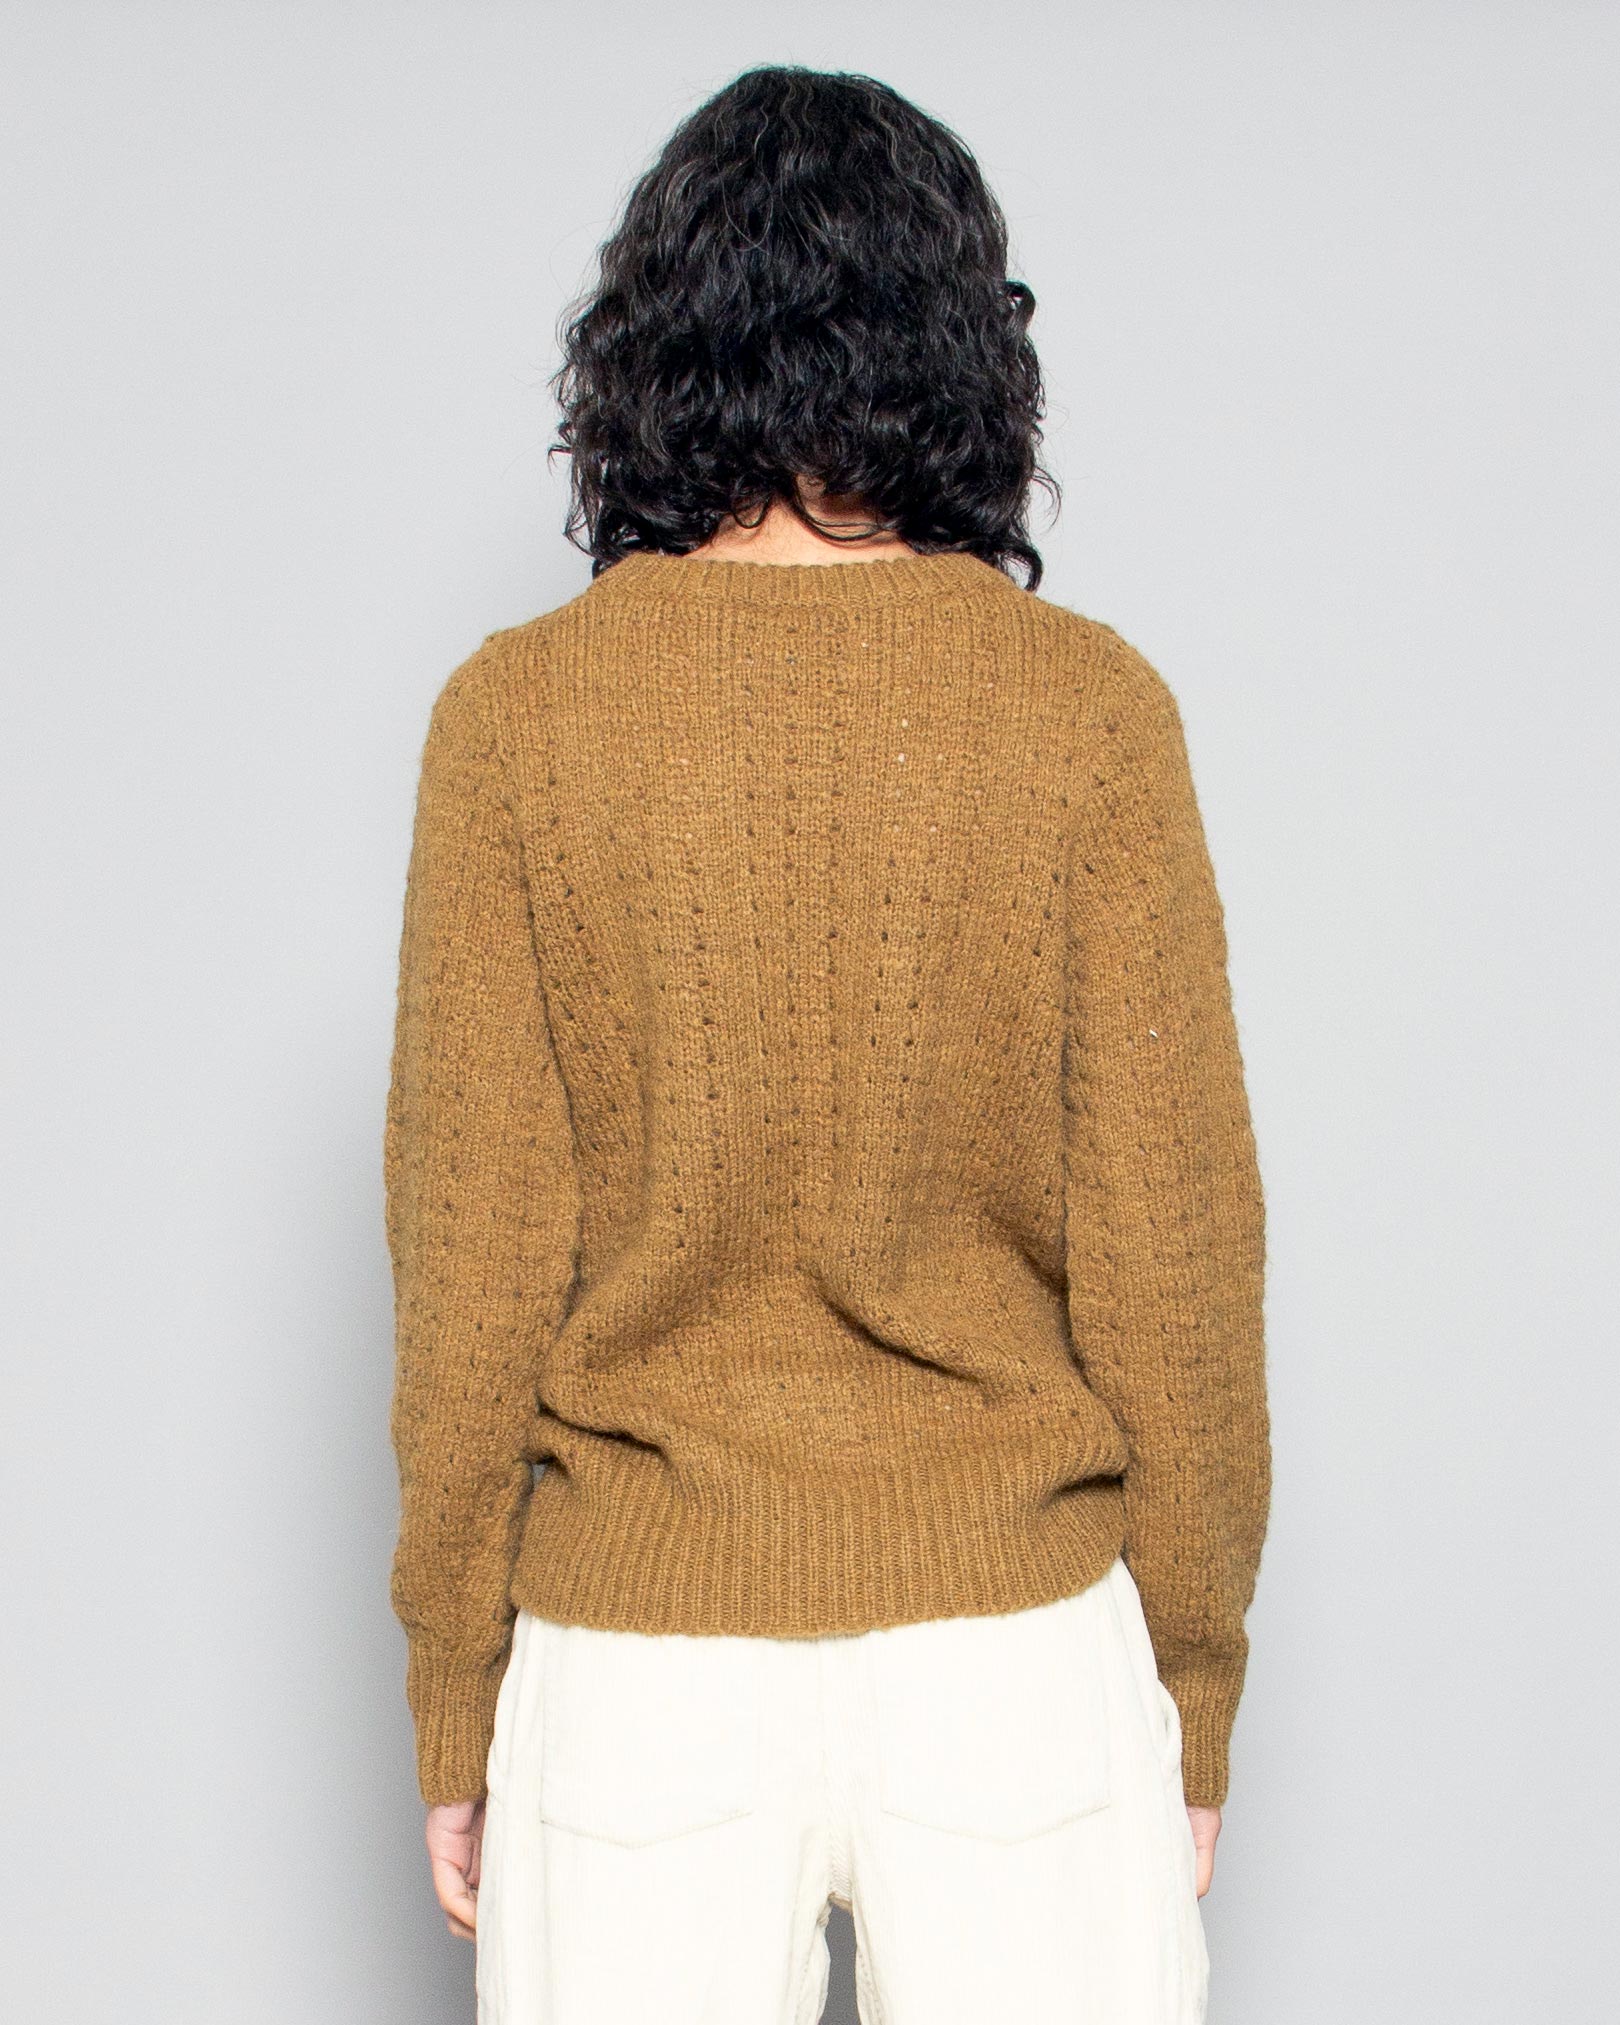 PERSONS Fran Oversized Wool Blend Sweater in Moss available at Lahn.shop